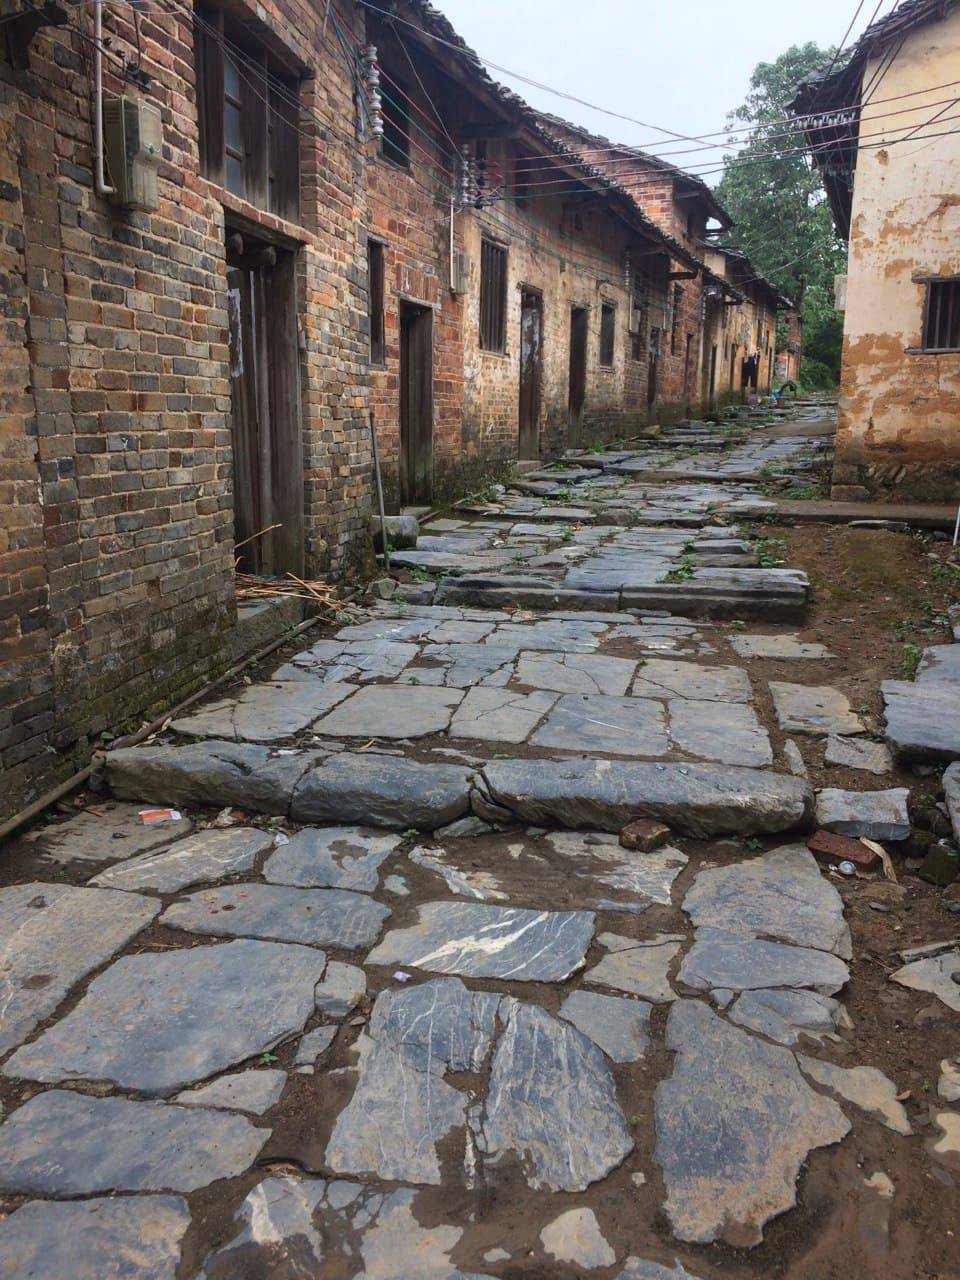 This stone pedestrian road looks pretty old. There were no paved roads in the village. It is like the Old Town of Stockholm (Gamla Stan) in Sweden.